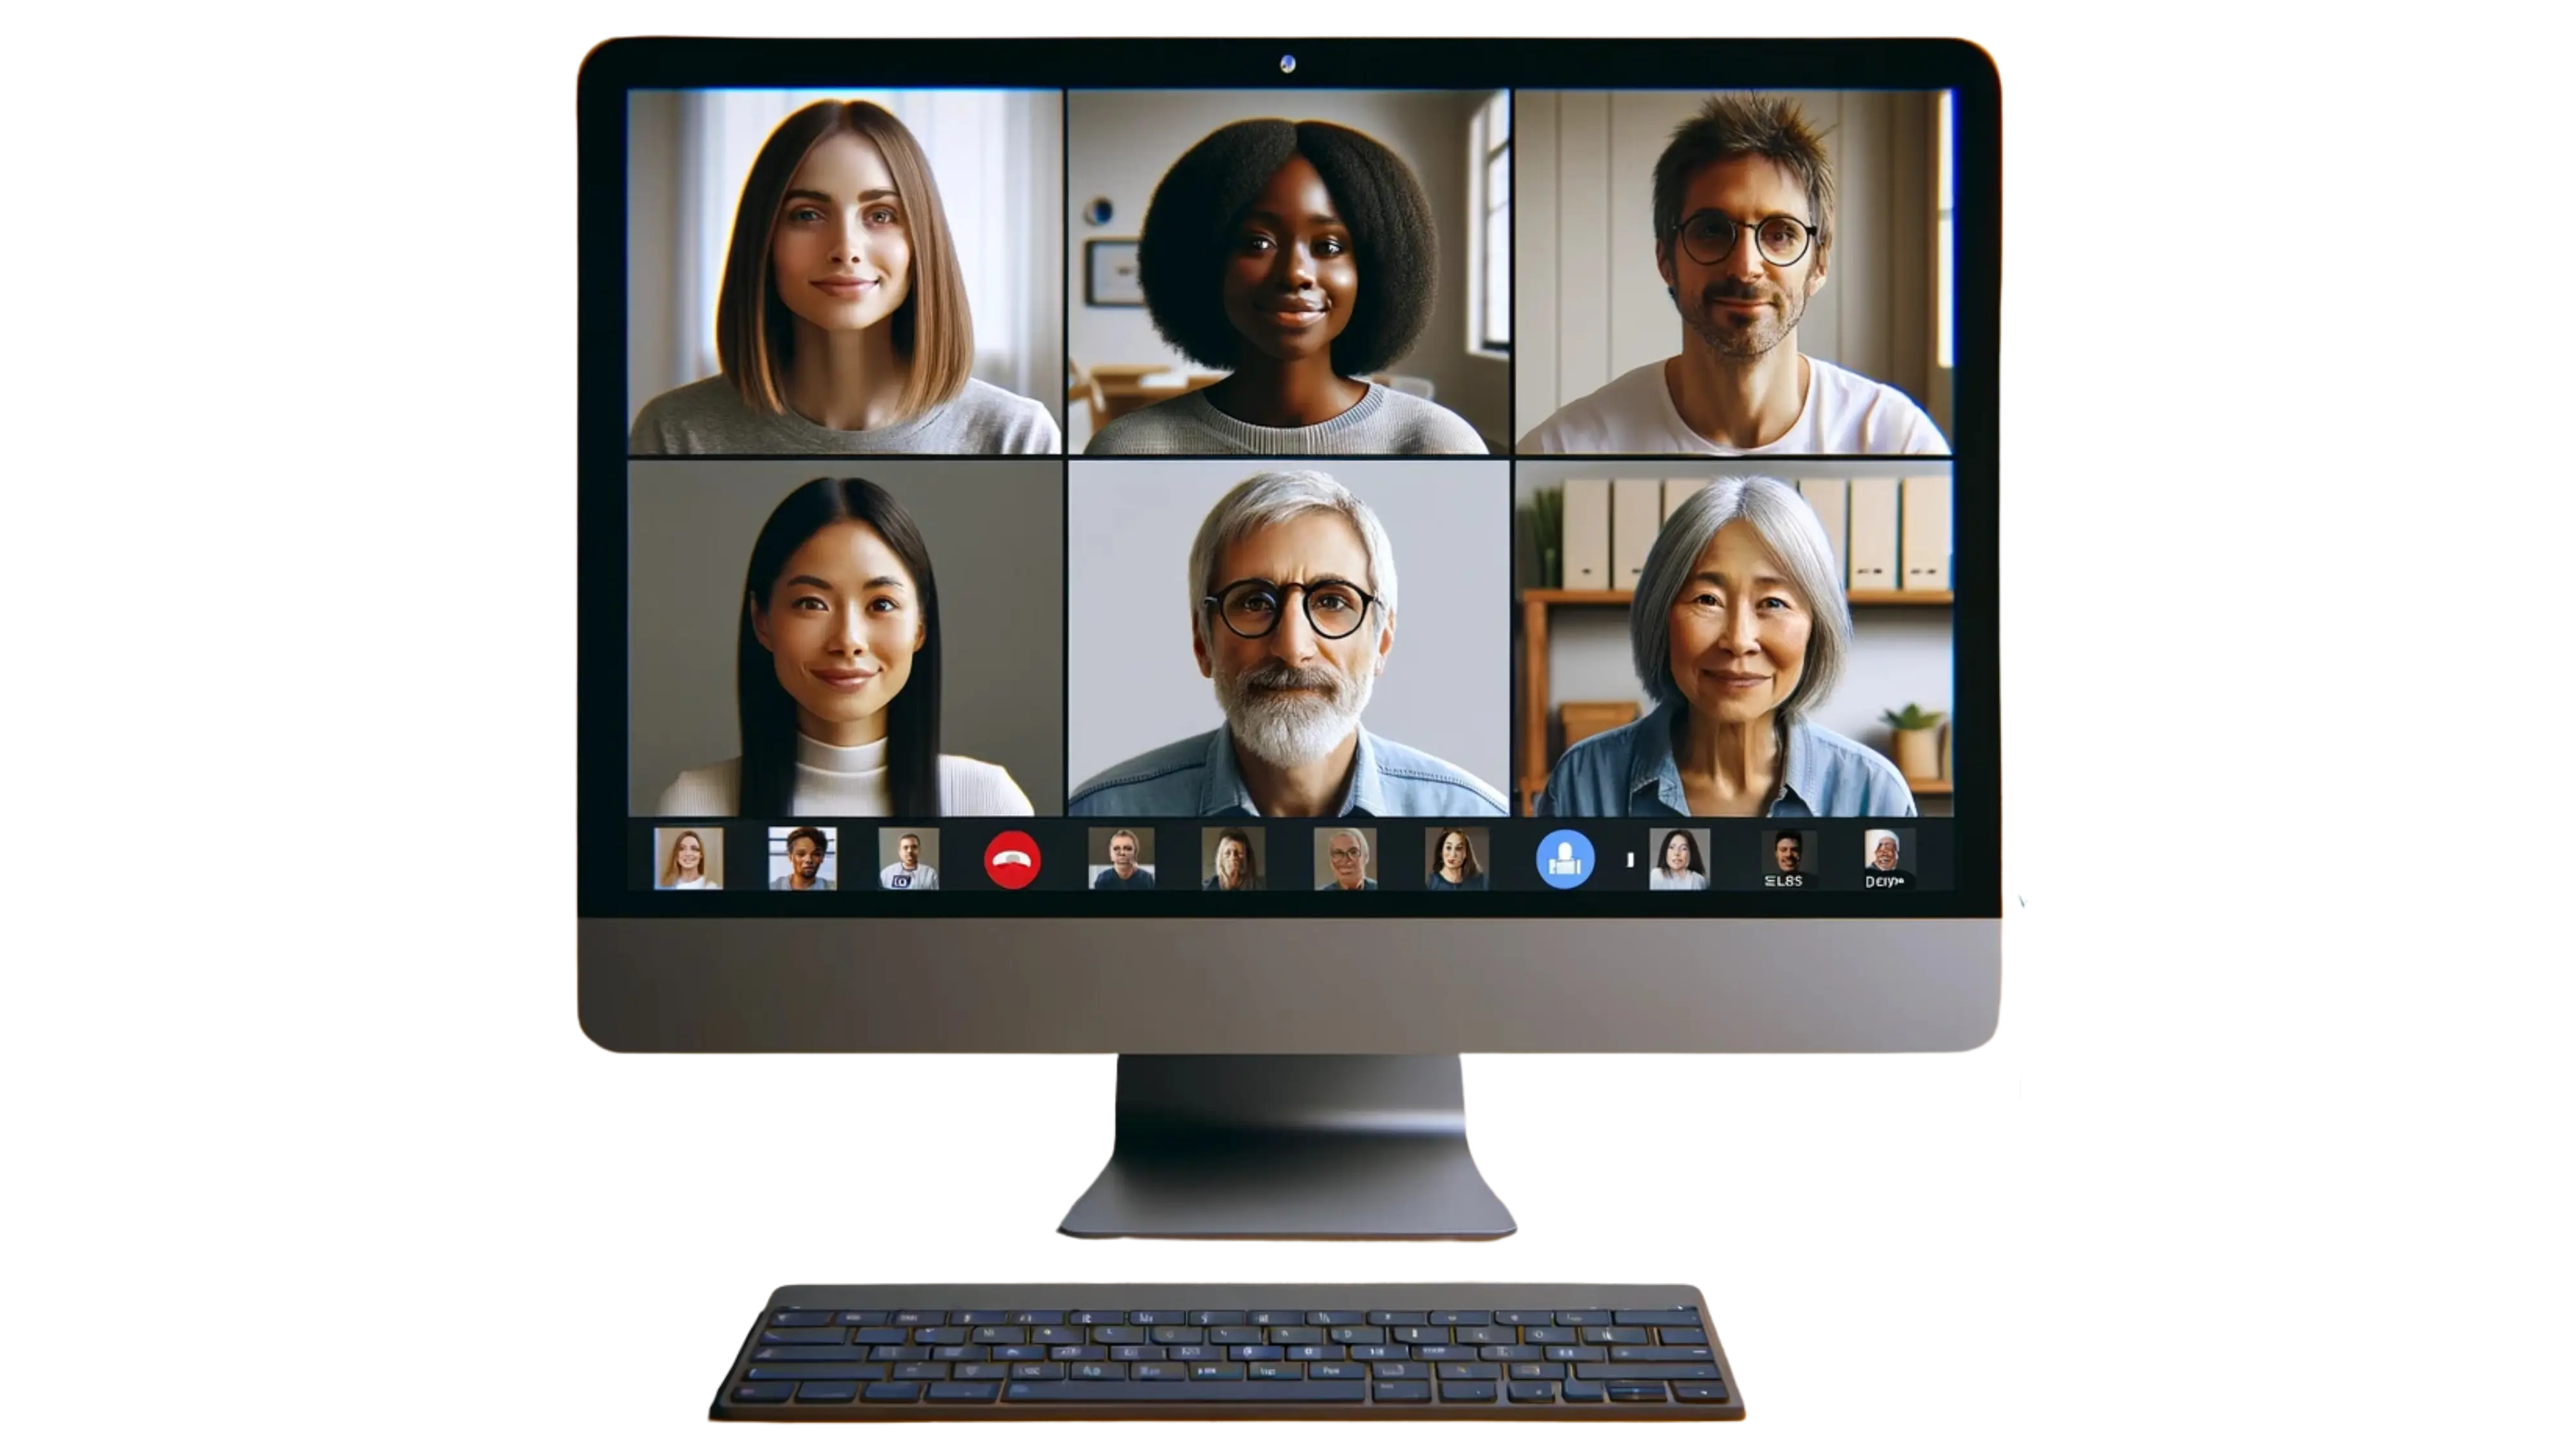 Secure Video conferencing